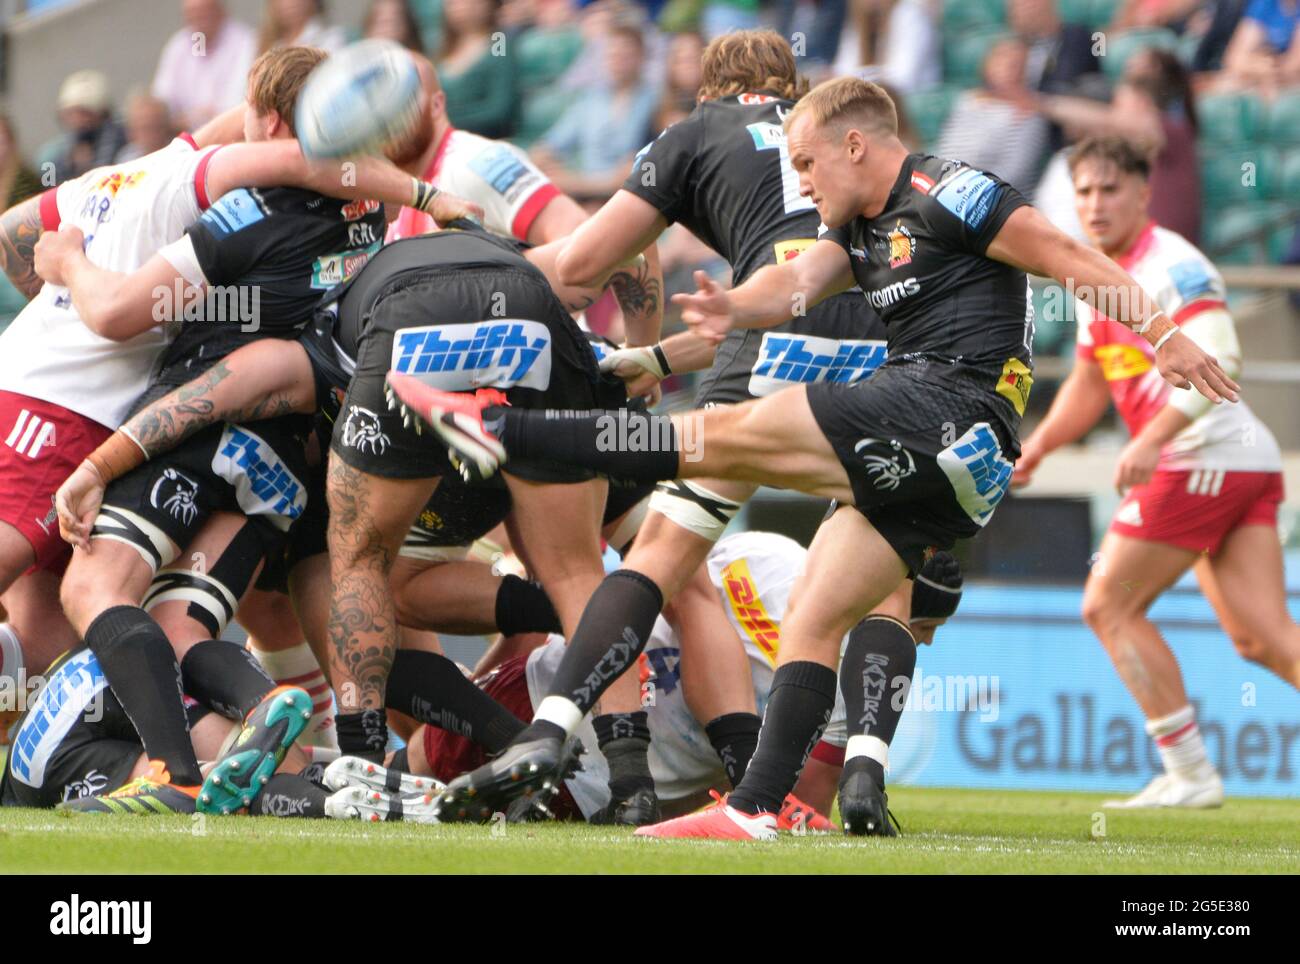 Gallagher Premiership Rugby Final Exeter Vs Harlequin at RFU Twickenham Stadium, UK. 26th June, 2021. Credit: Leo Mason Alamy News & Sport. Action during the match which was won by Harlequins 40-38 Credit: Leo Mason sports/Alamy Live News Stock Photo